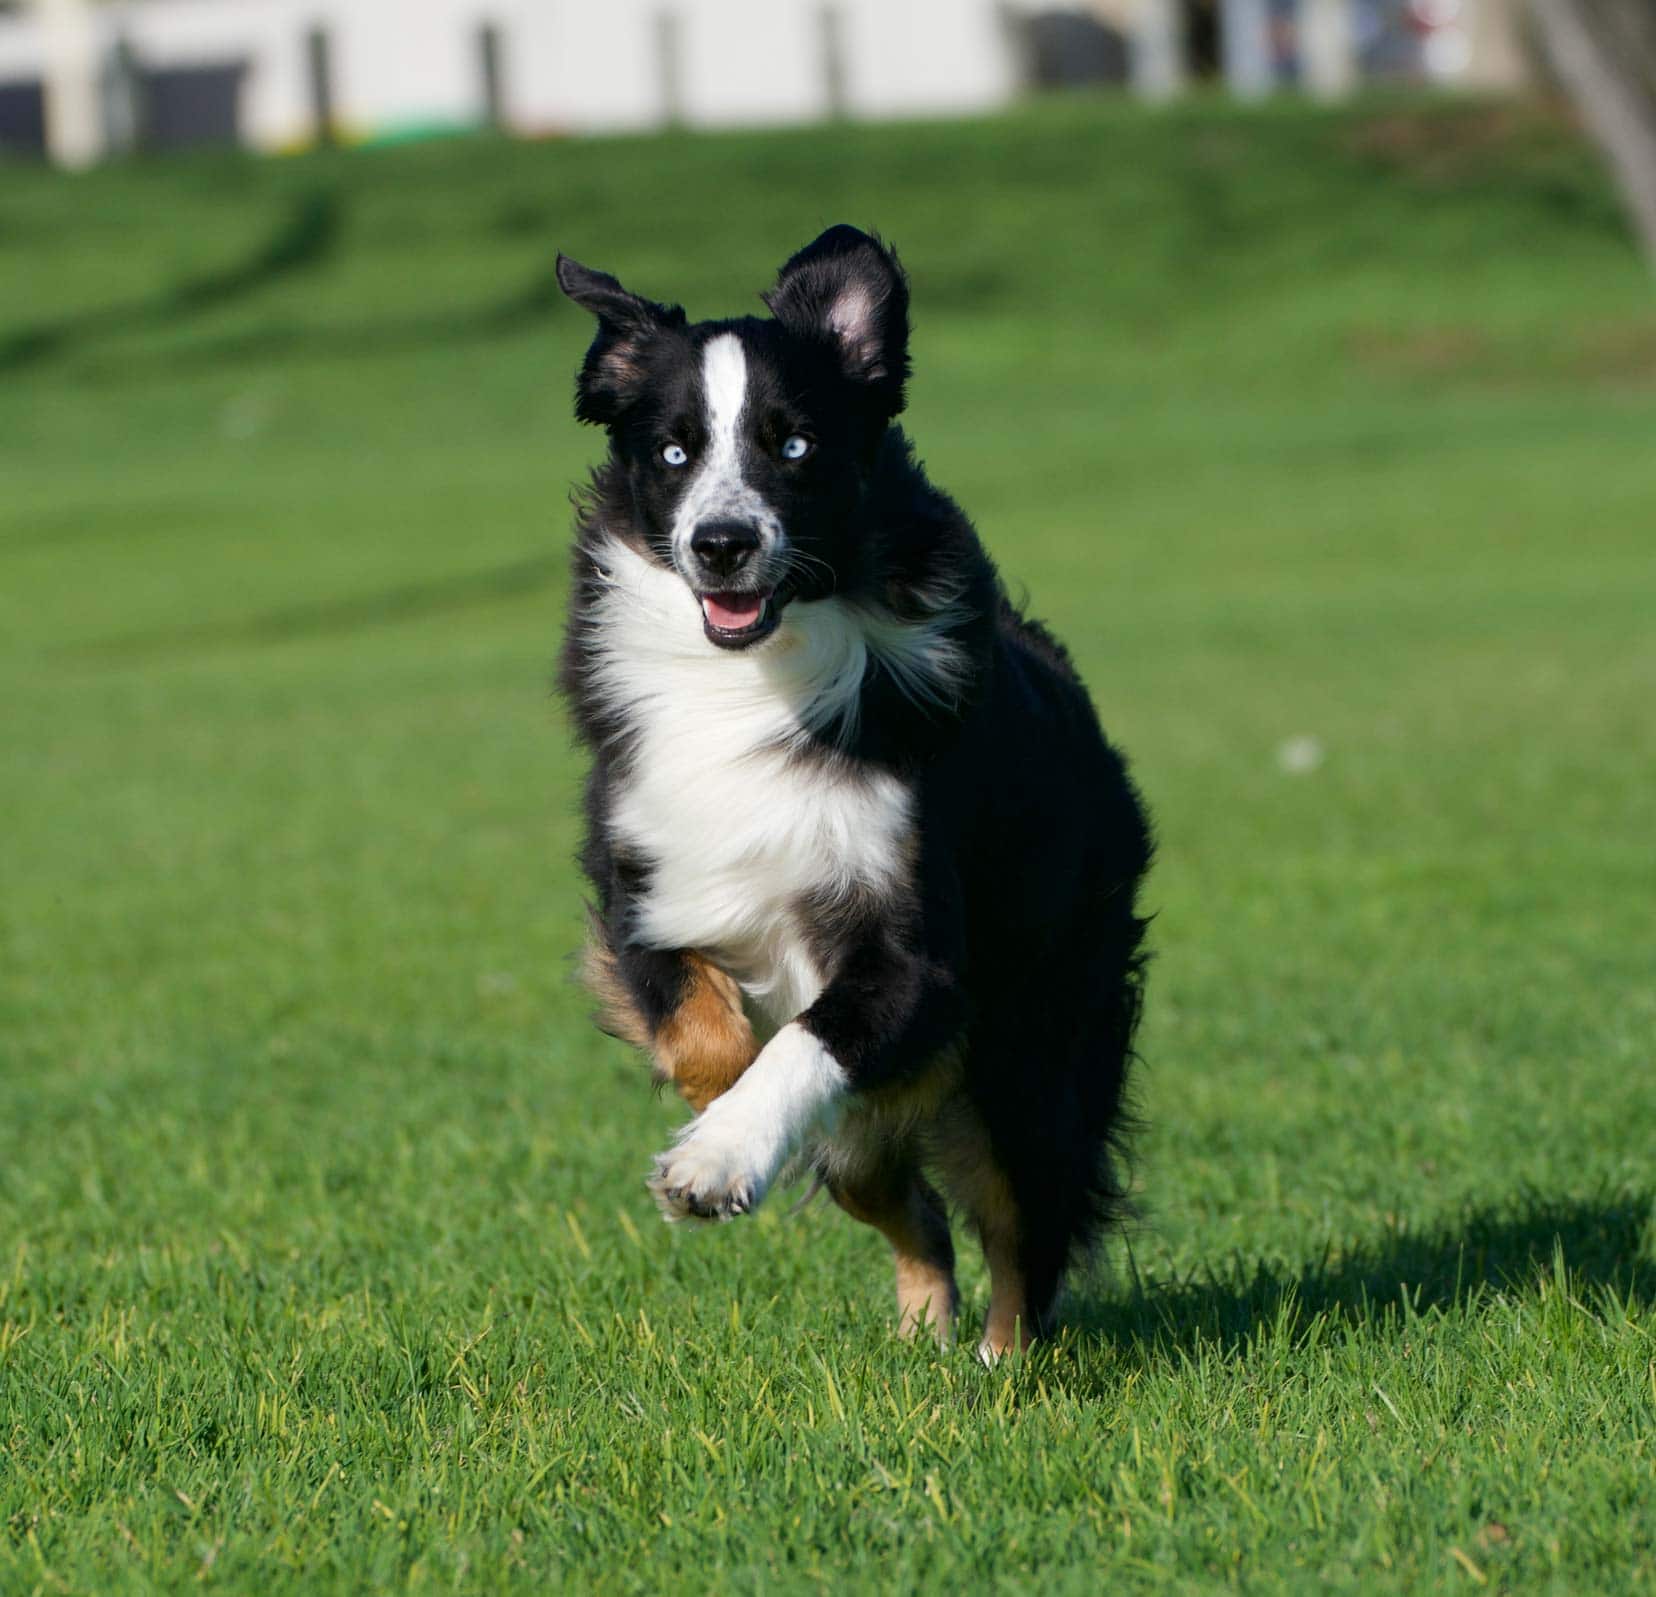 Archie, a black and white dog with a touch of brown on one paw running on grass 